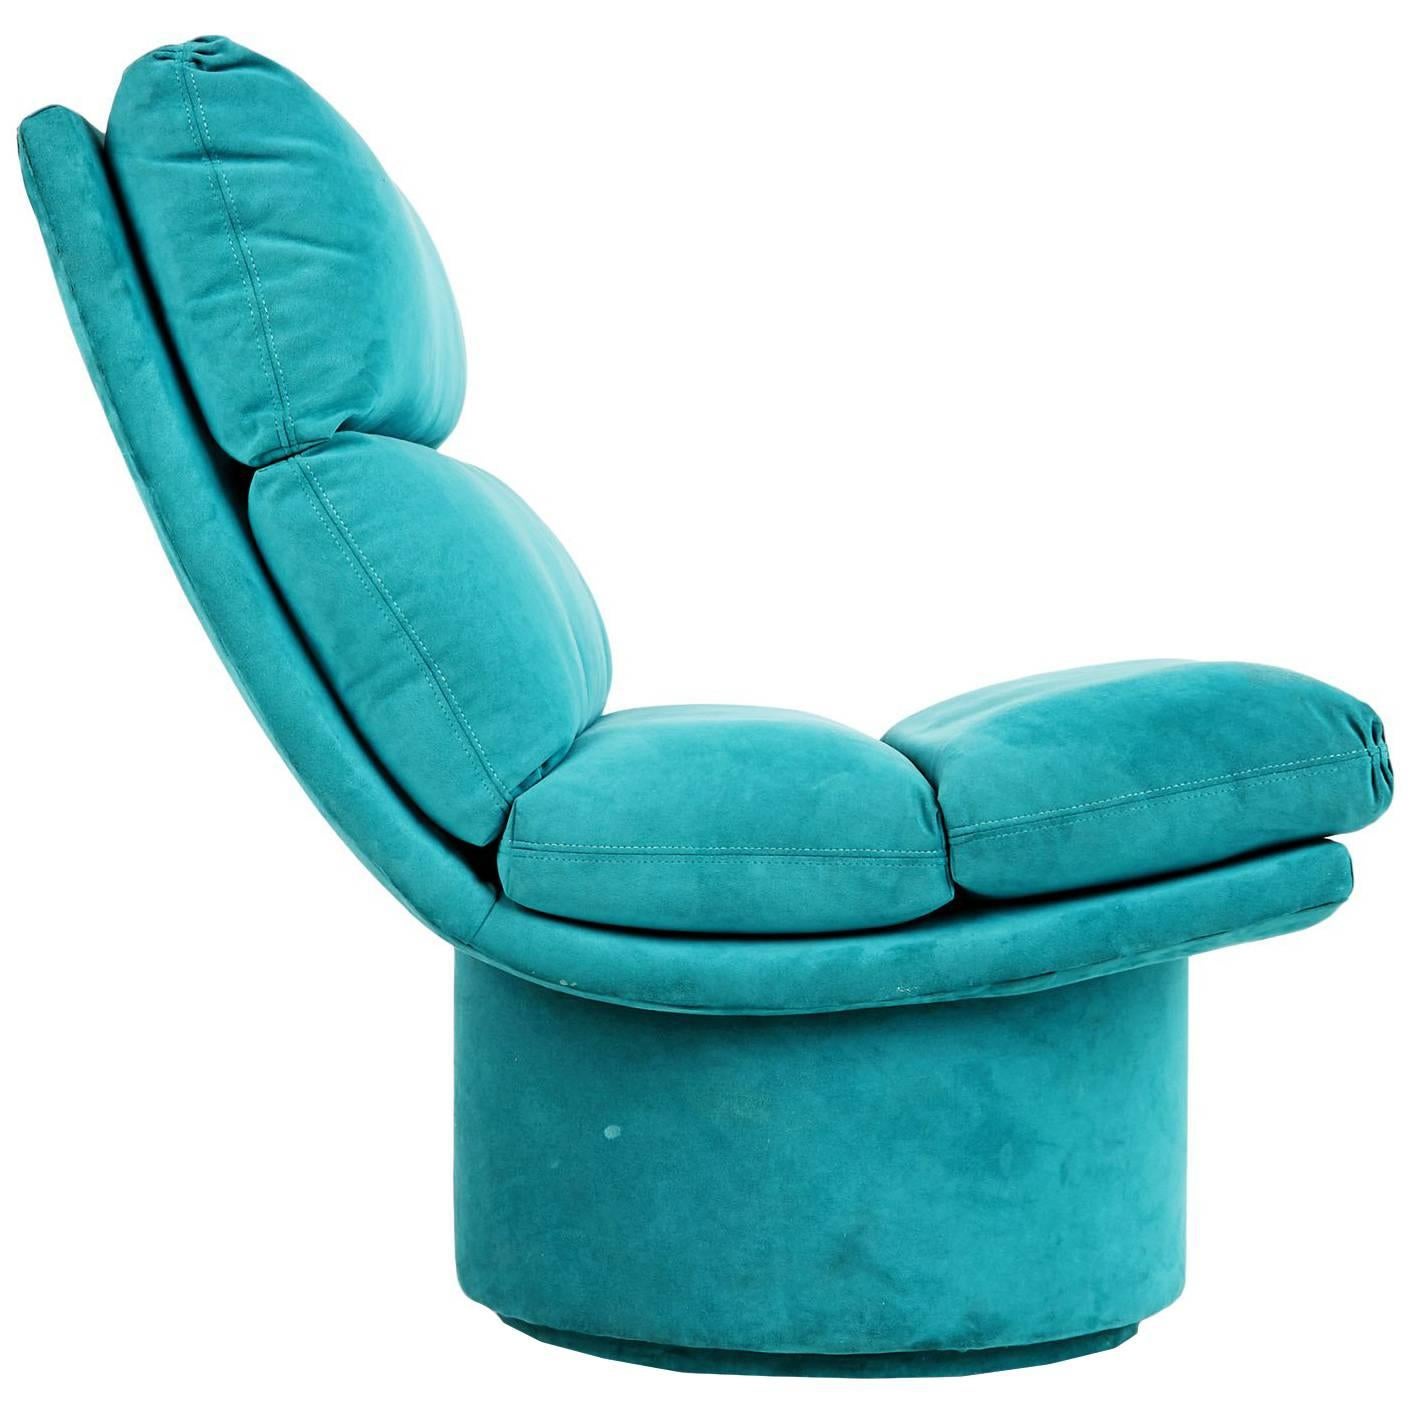 Steve Chase Styled Channel Tufted Swivel Chair, circa 1980